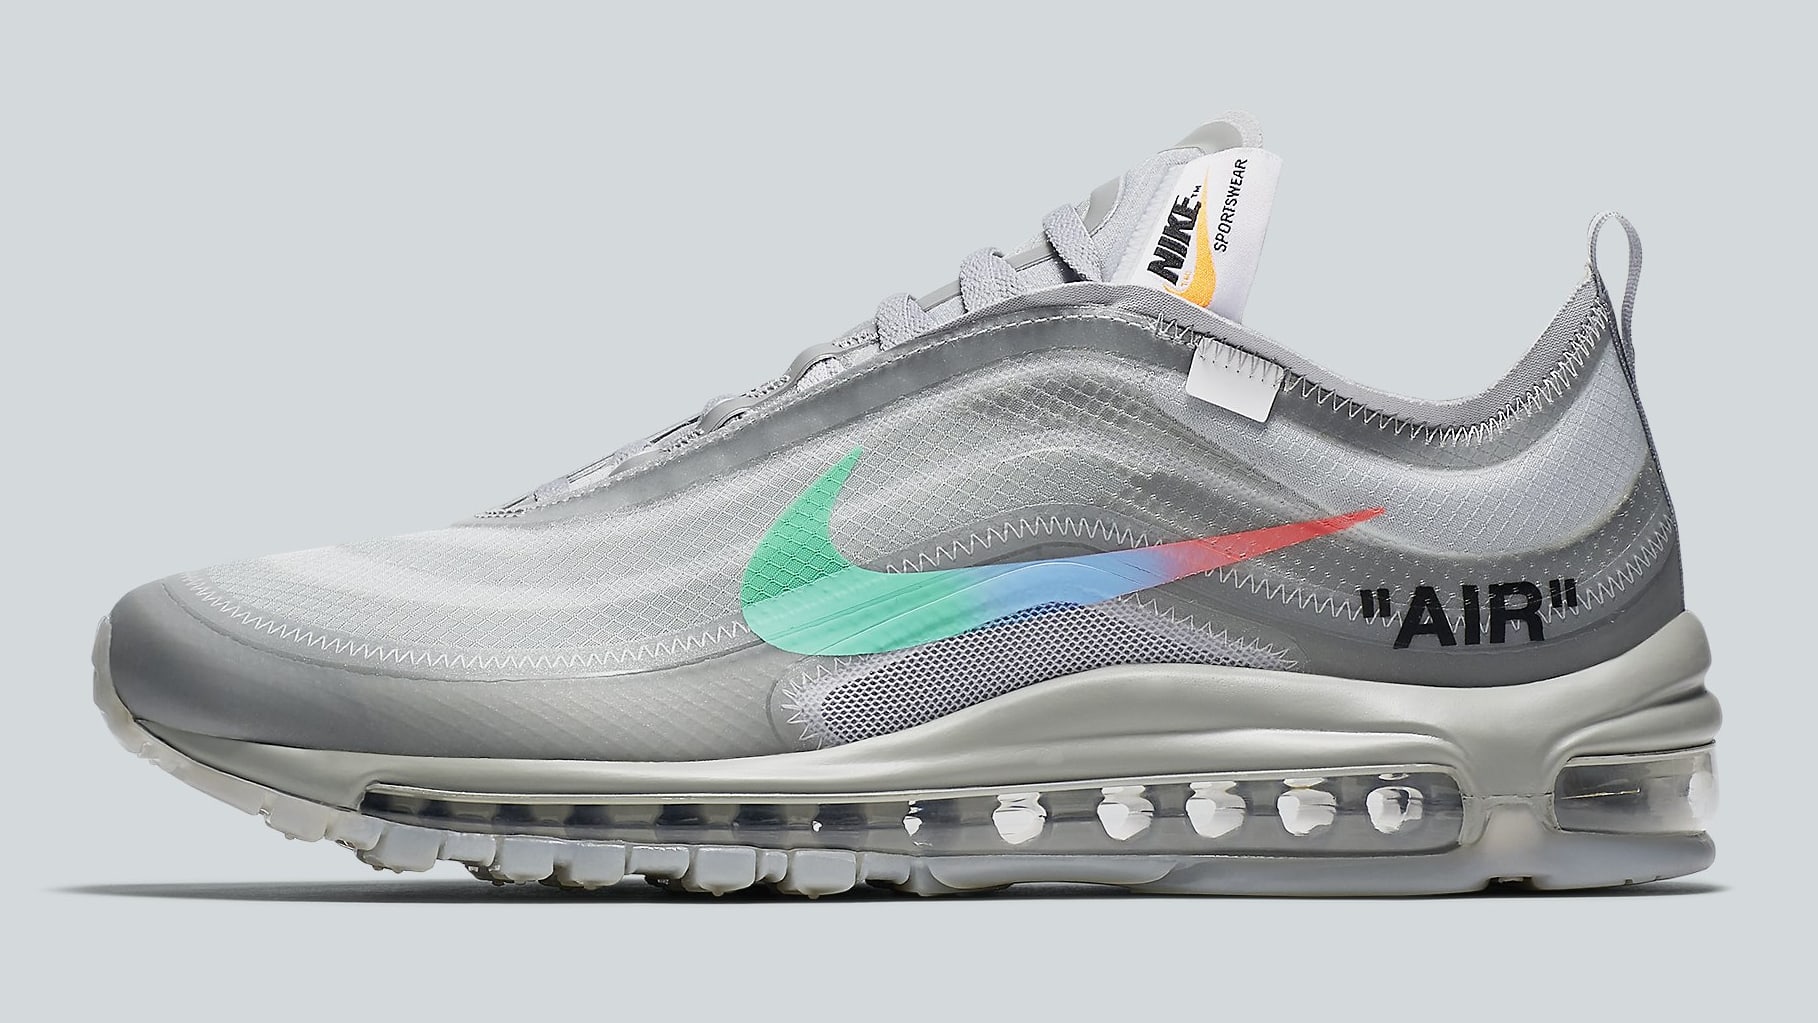 New Release Information for the 'Menta' Off-White x Air Max 97